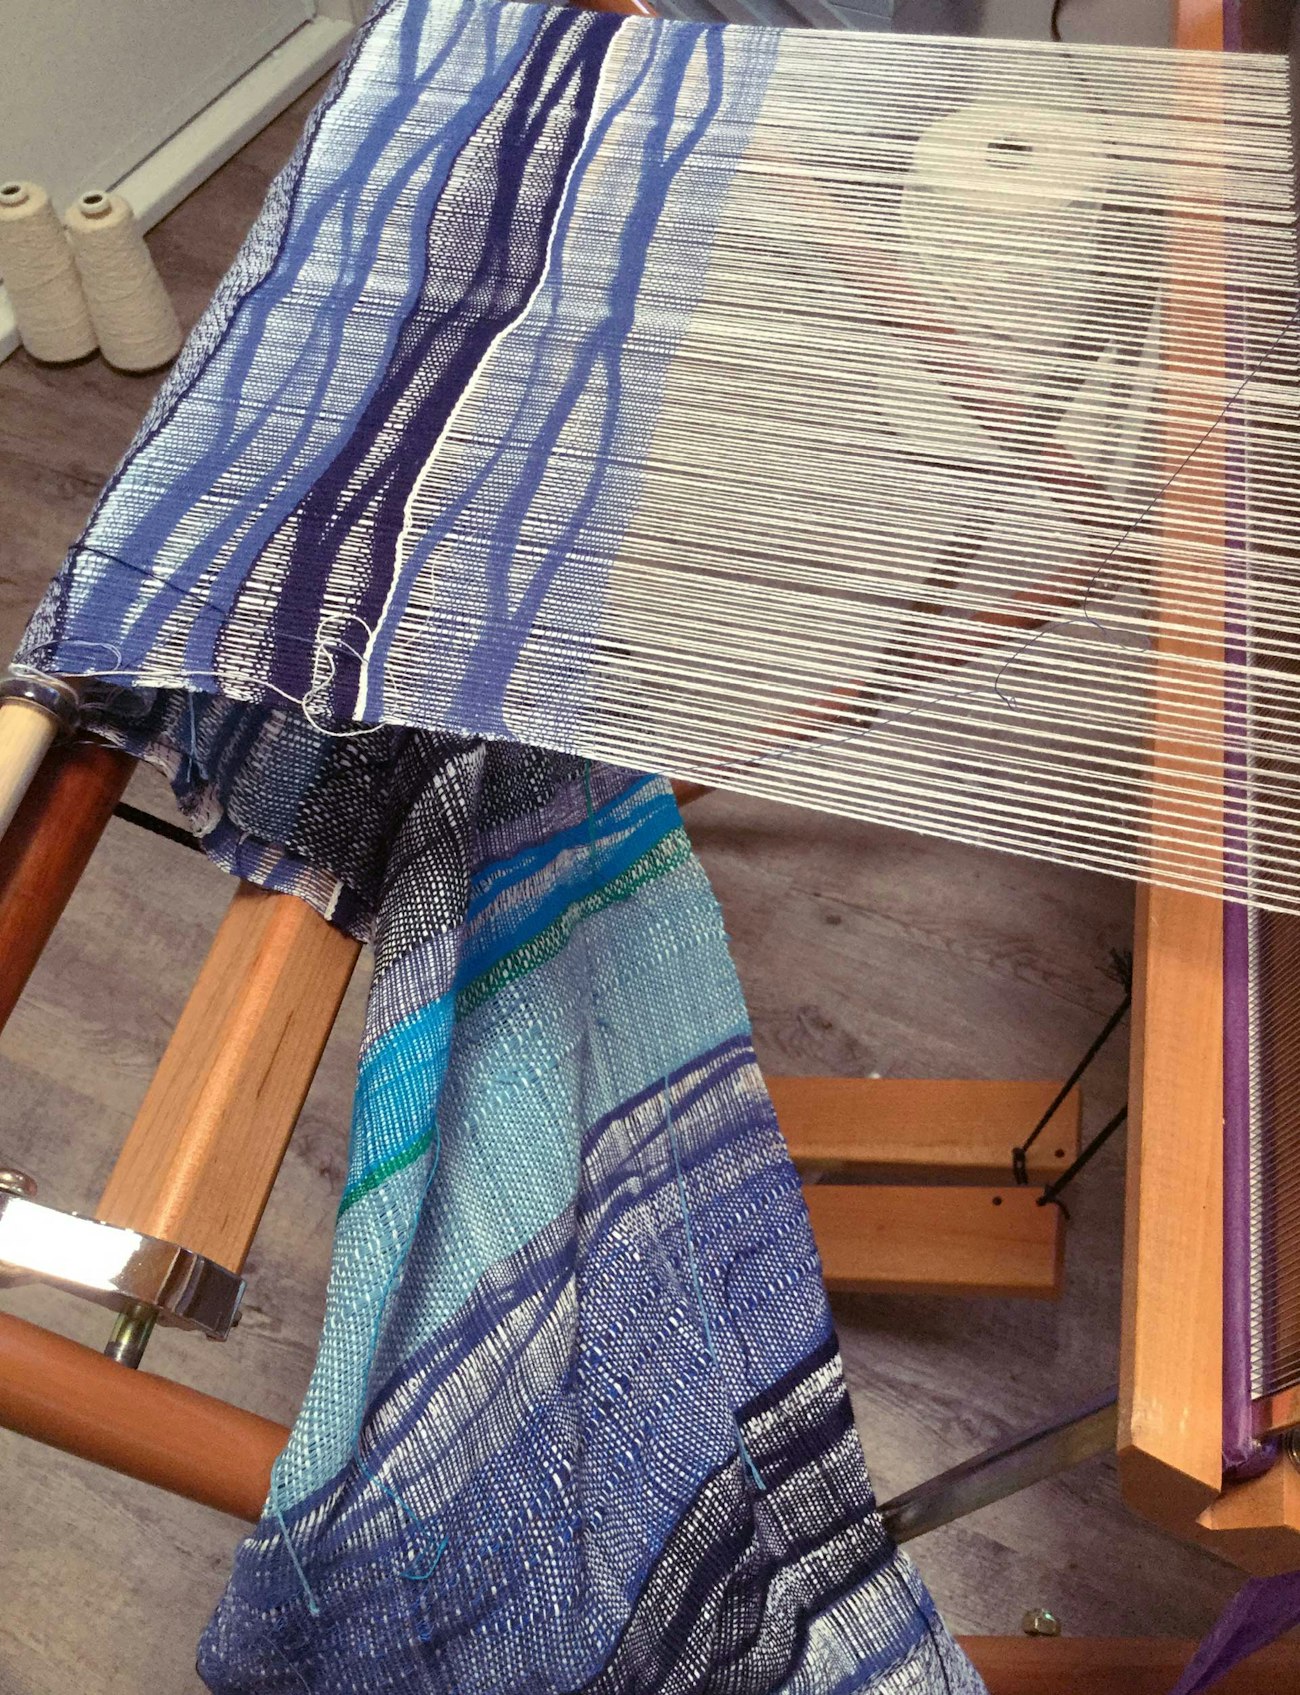 weaving-with-a-wave-stick-2